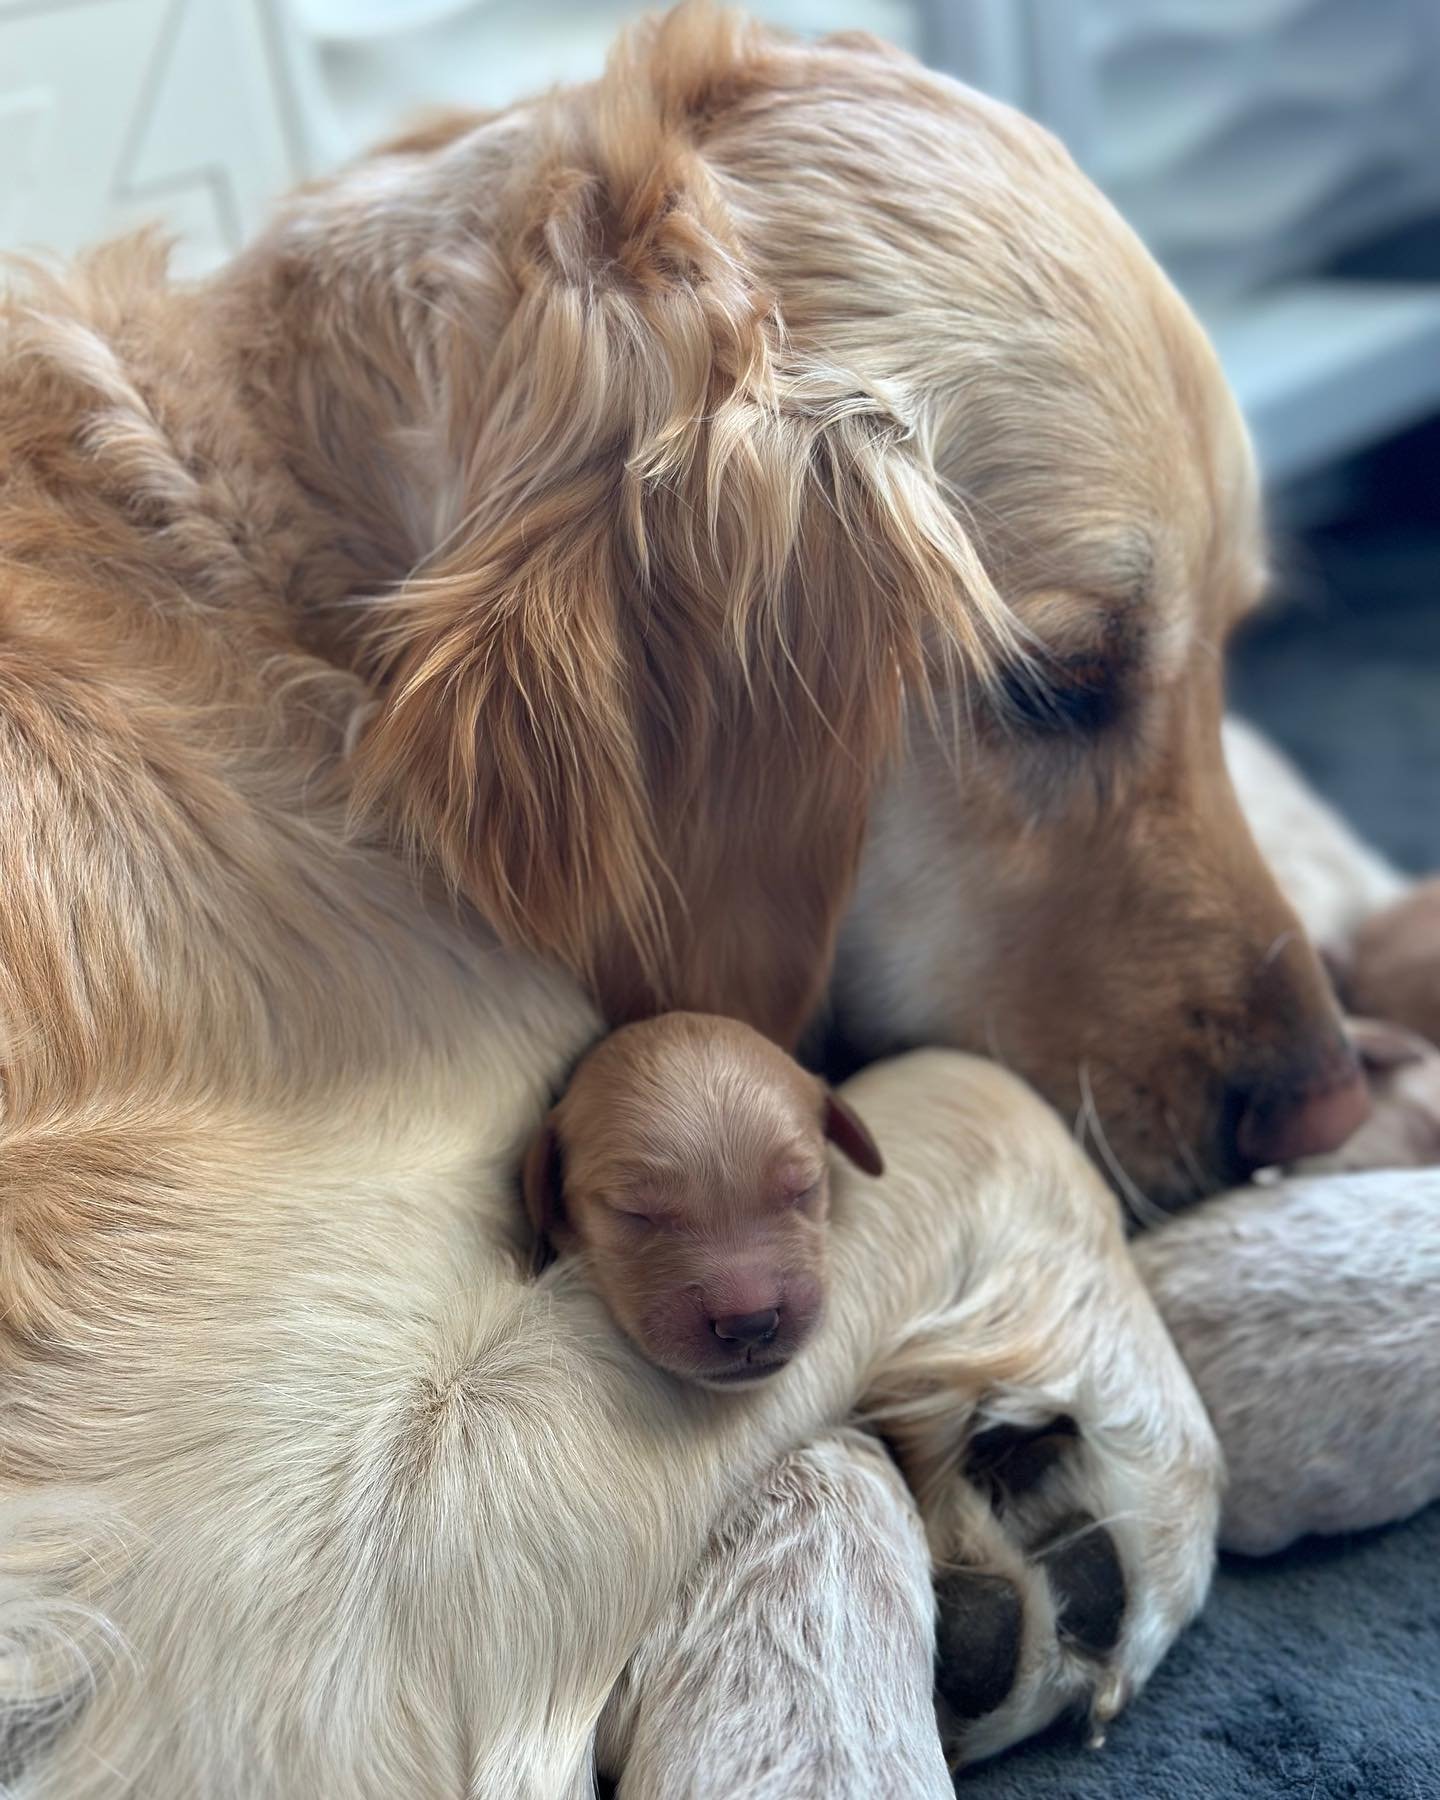 These pictures melt my heart. Our newest babies we born May 11. Abby had 11 perfect Goldendoodle puppies they are so precious. Abby is doing so great as a first time mama